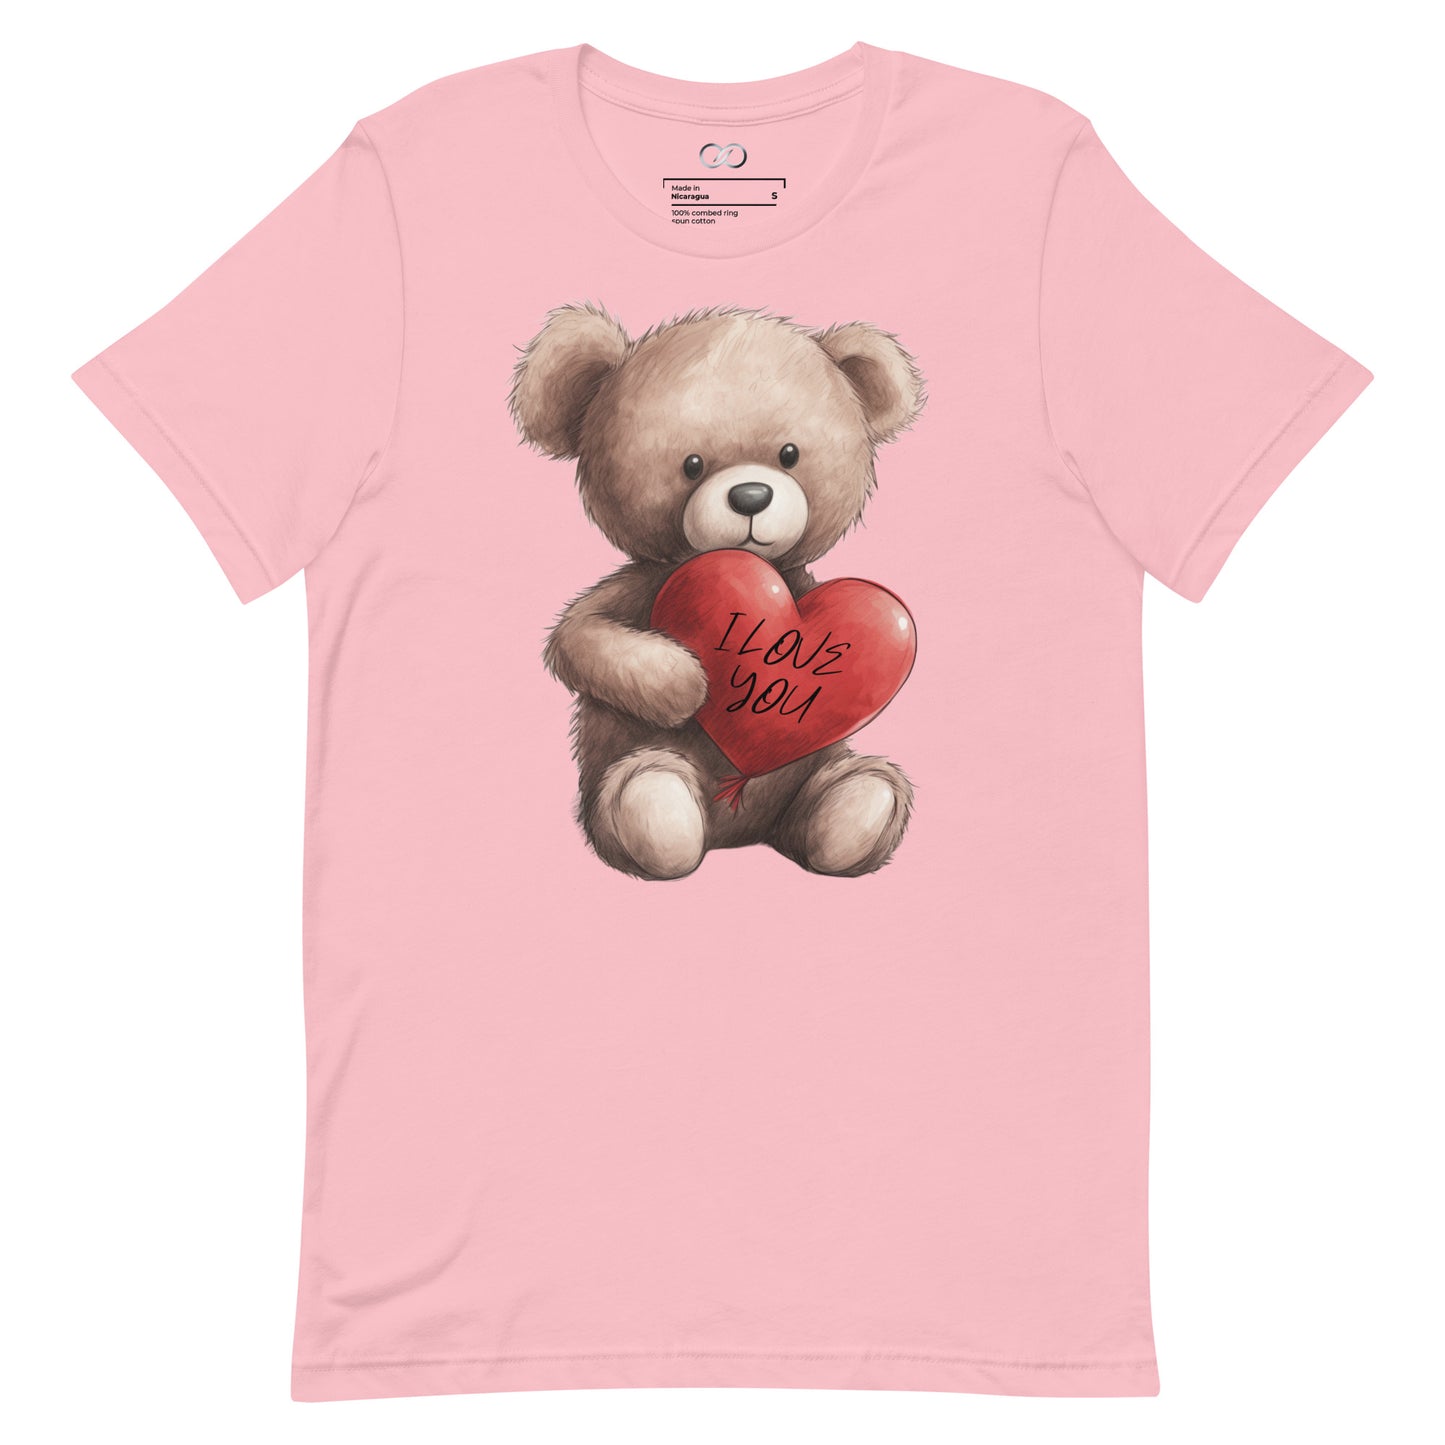 pink t-shirt displaying a charming teddy bear clutching a red heart with 'I Love You' script, symbolizing affection and love.